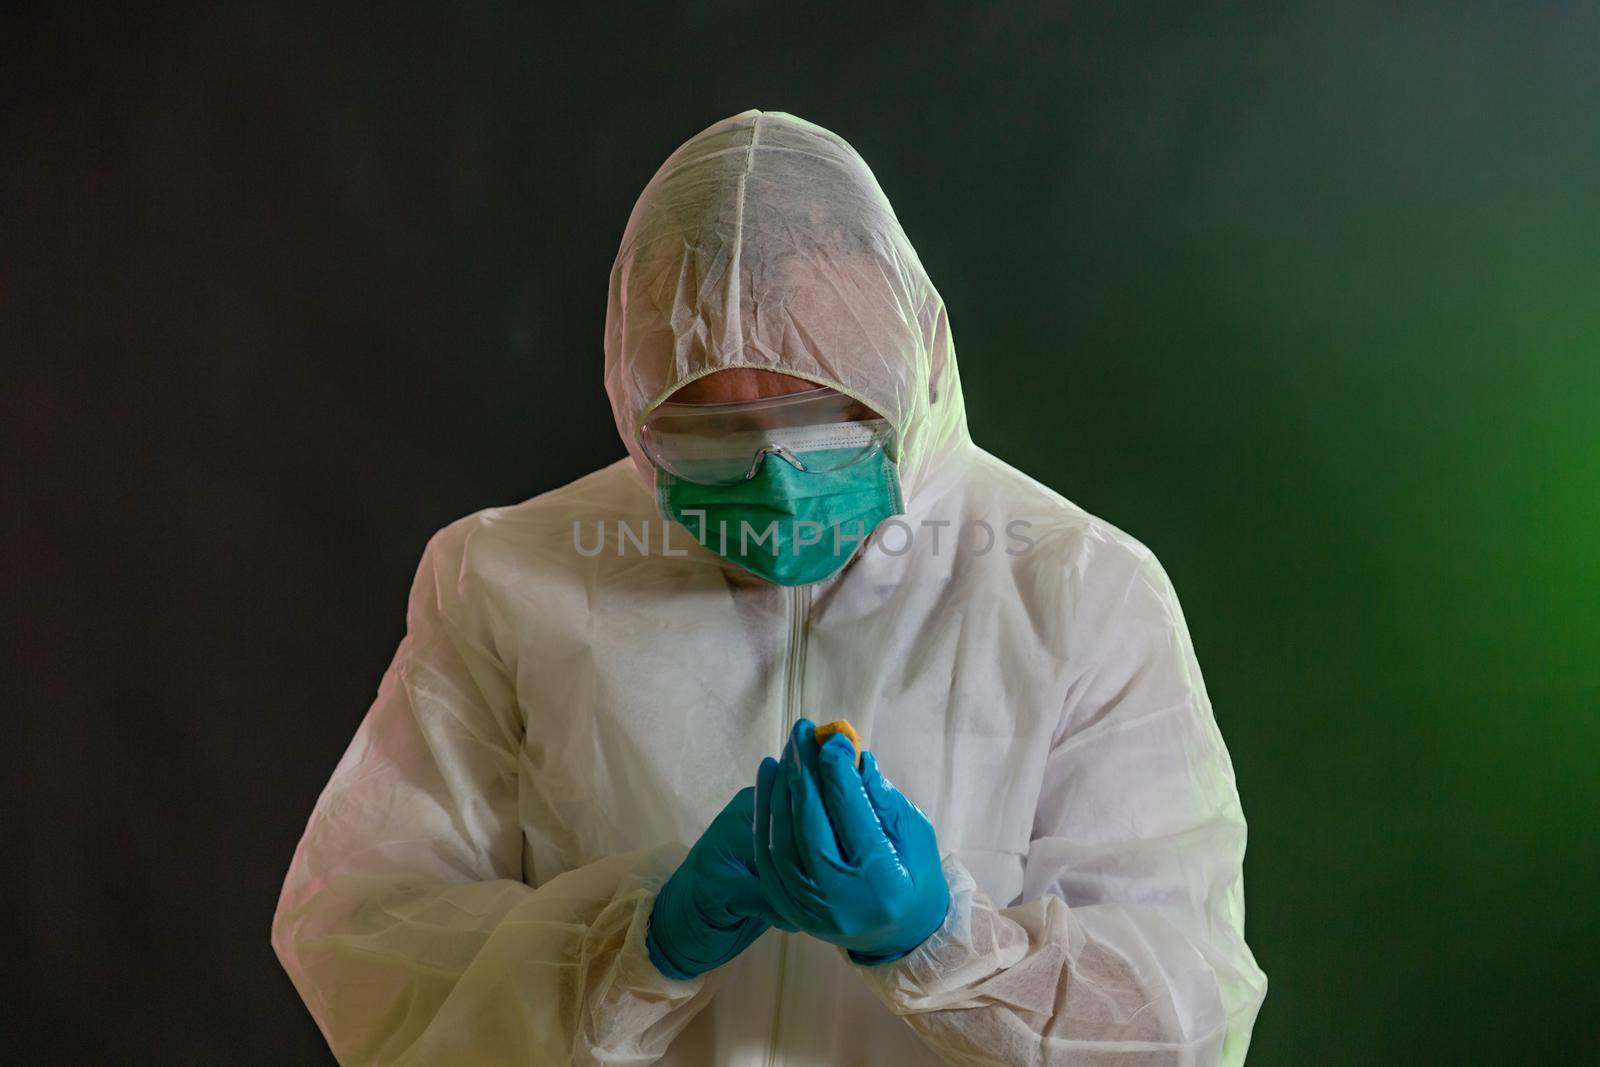 Man in chemical suit inspecting possible toxic materials by imagesbykenny